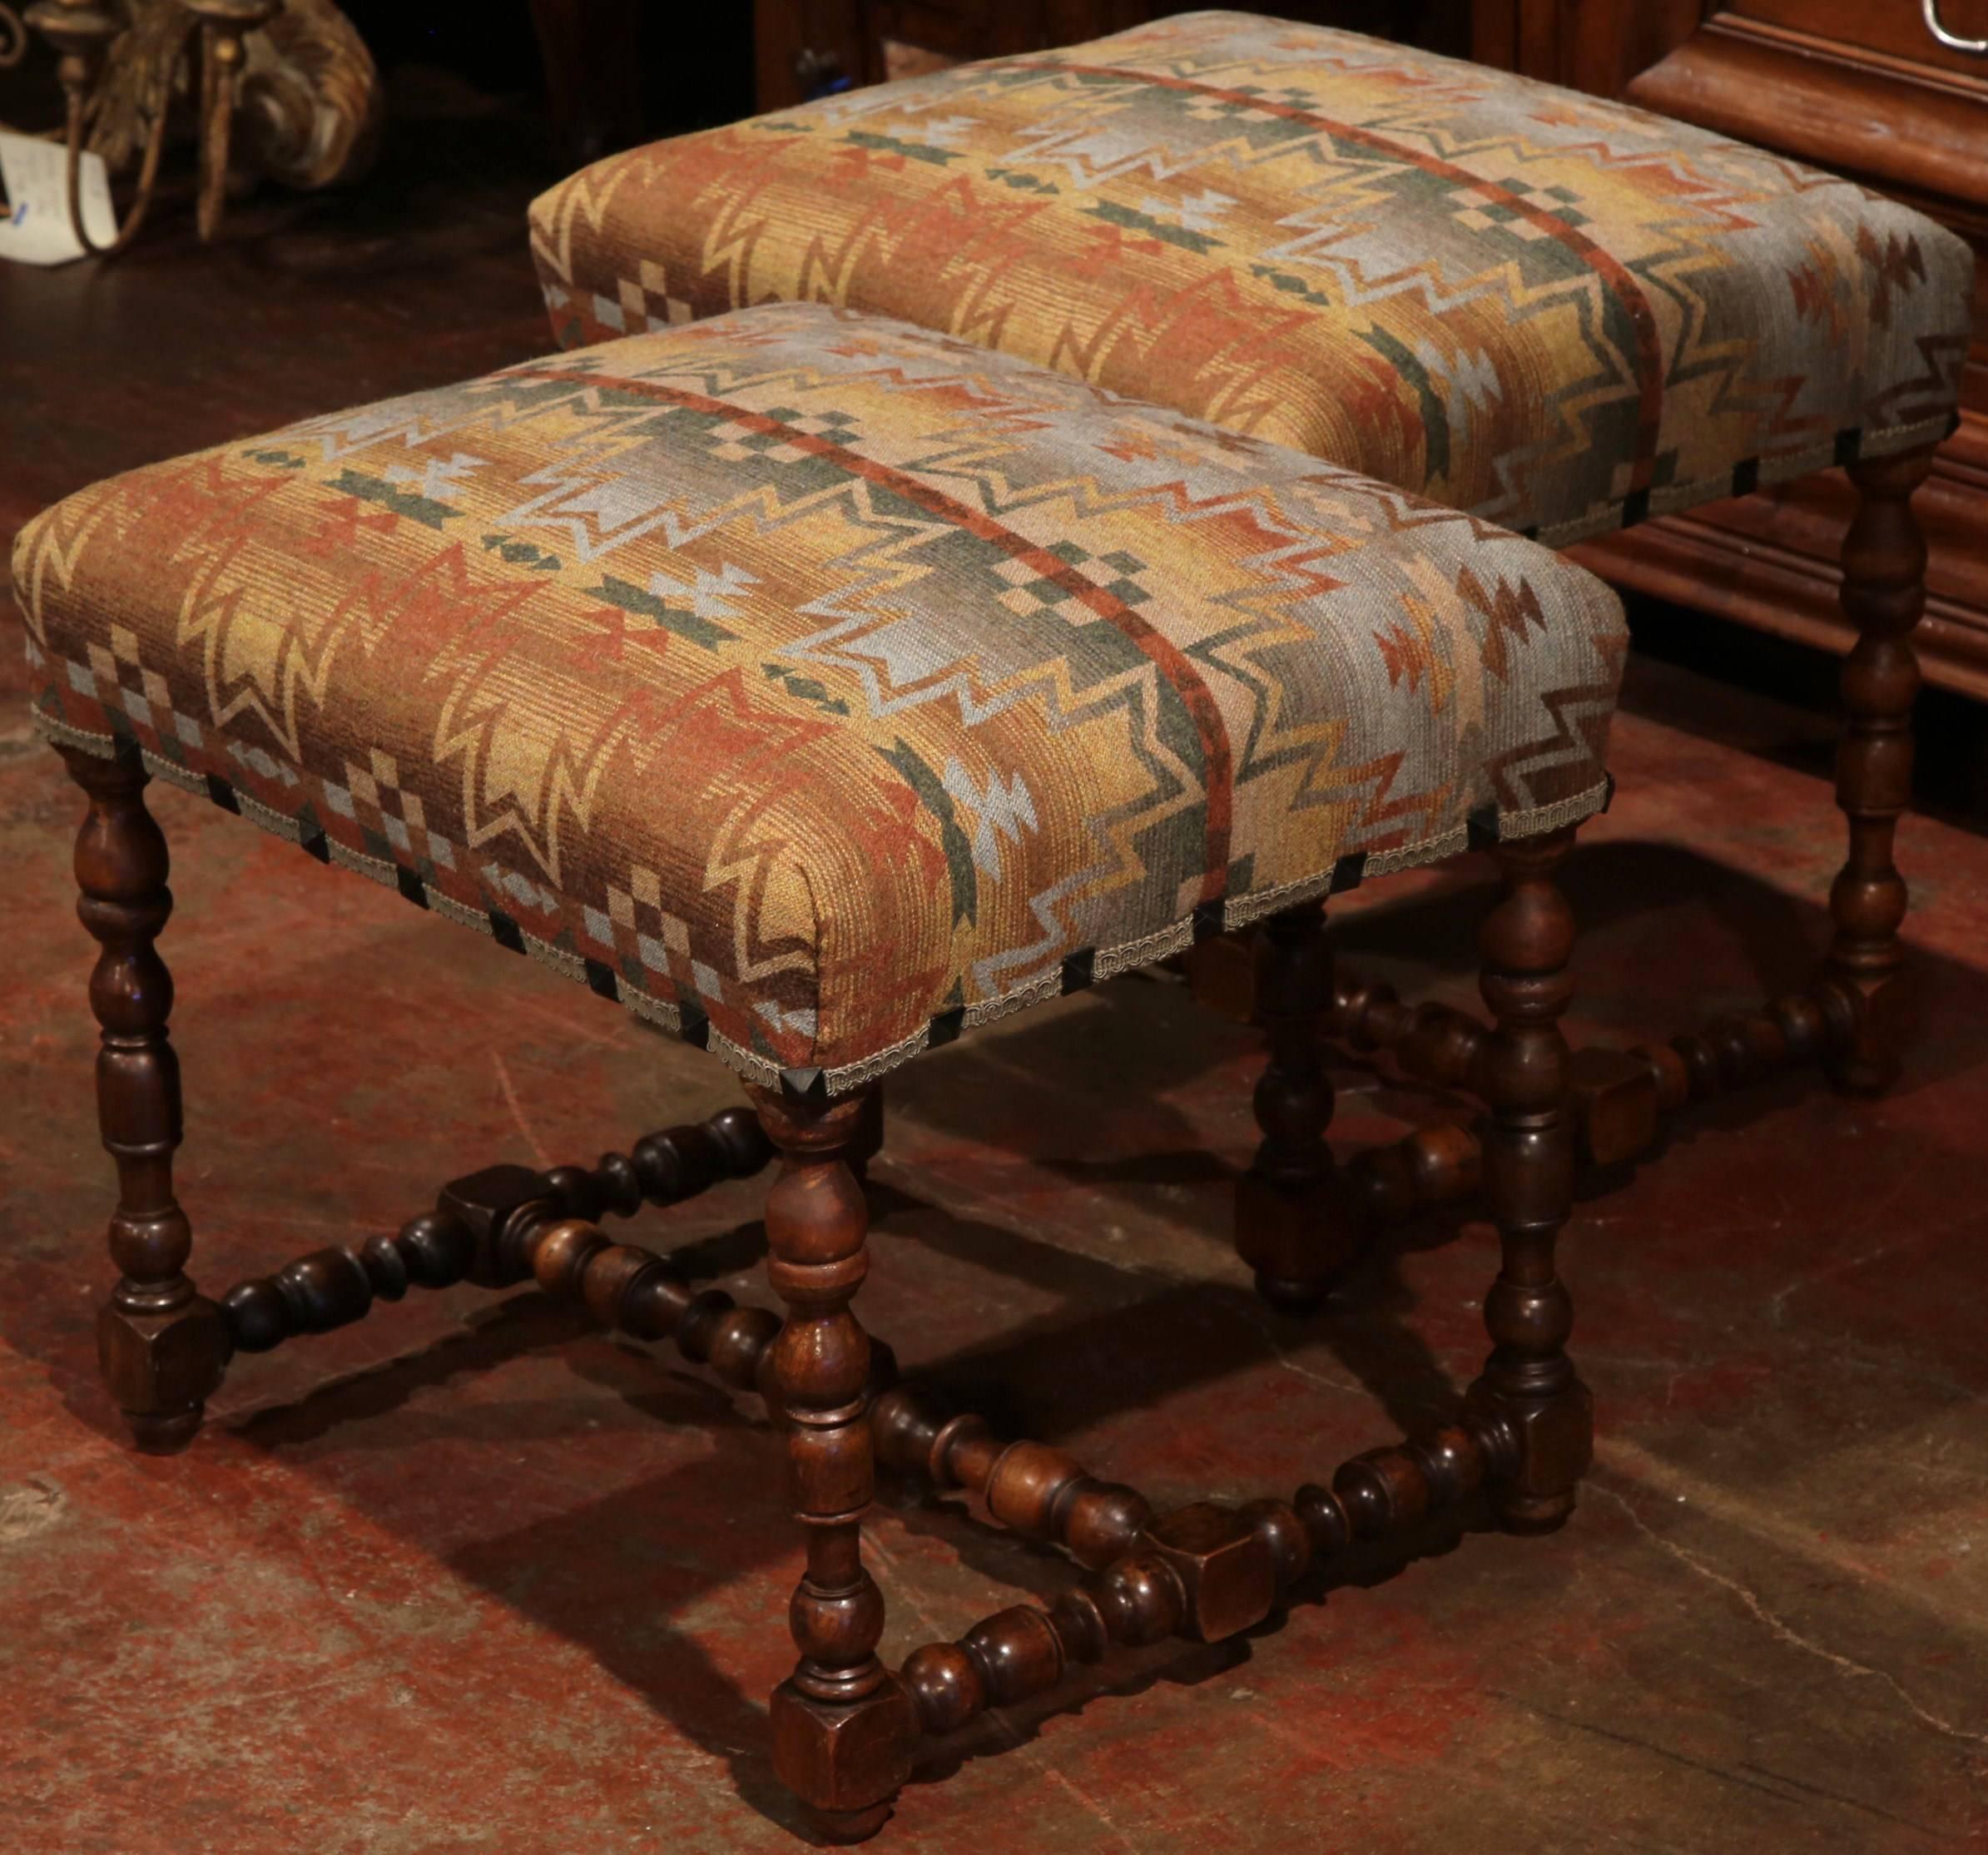 Nice pair of antique stools in fruit wood from southern France, circa 1880; reupholstered with a Ralph Lauren fabric in beige and brown palette, new trim and nailheads, turned legs and stretcher, these stools are in excellent condition with a rich